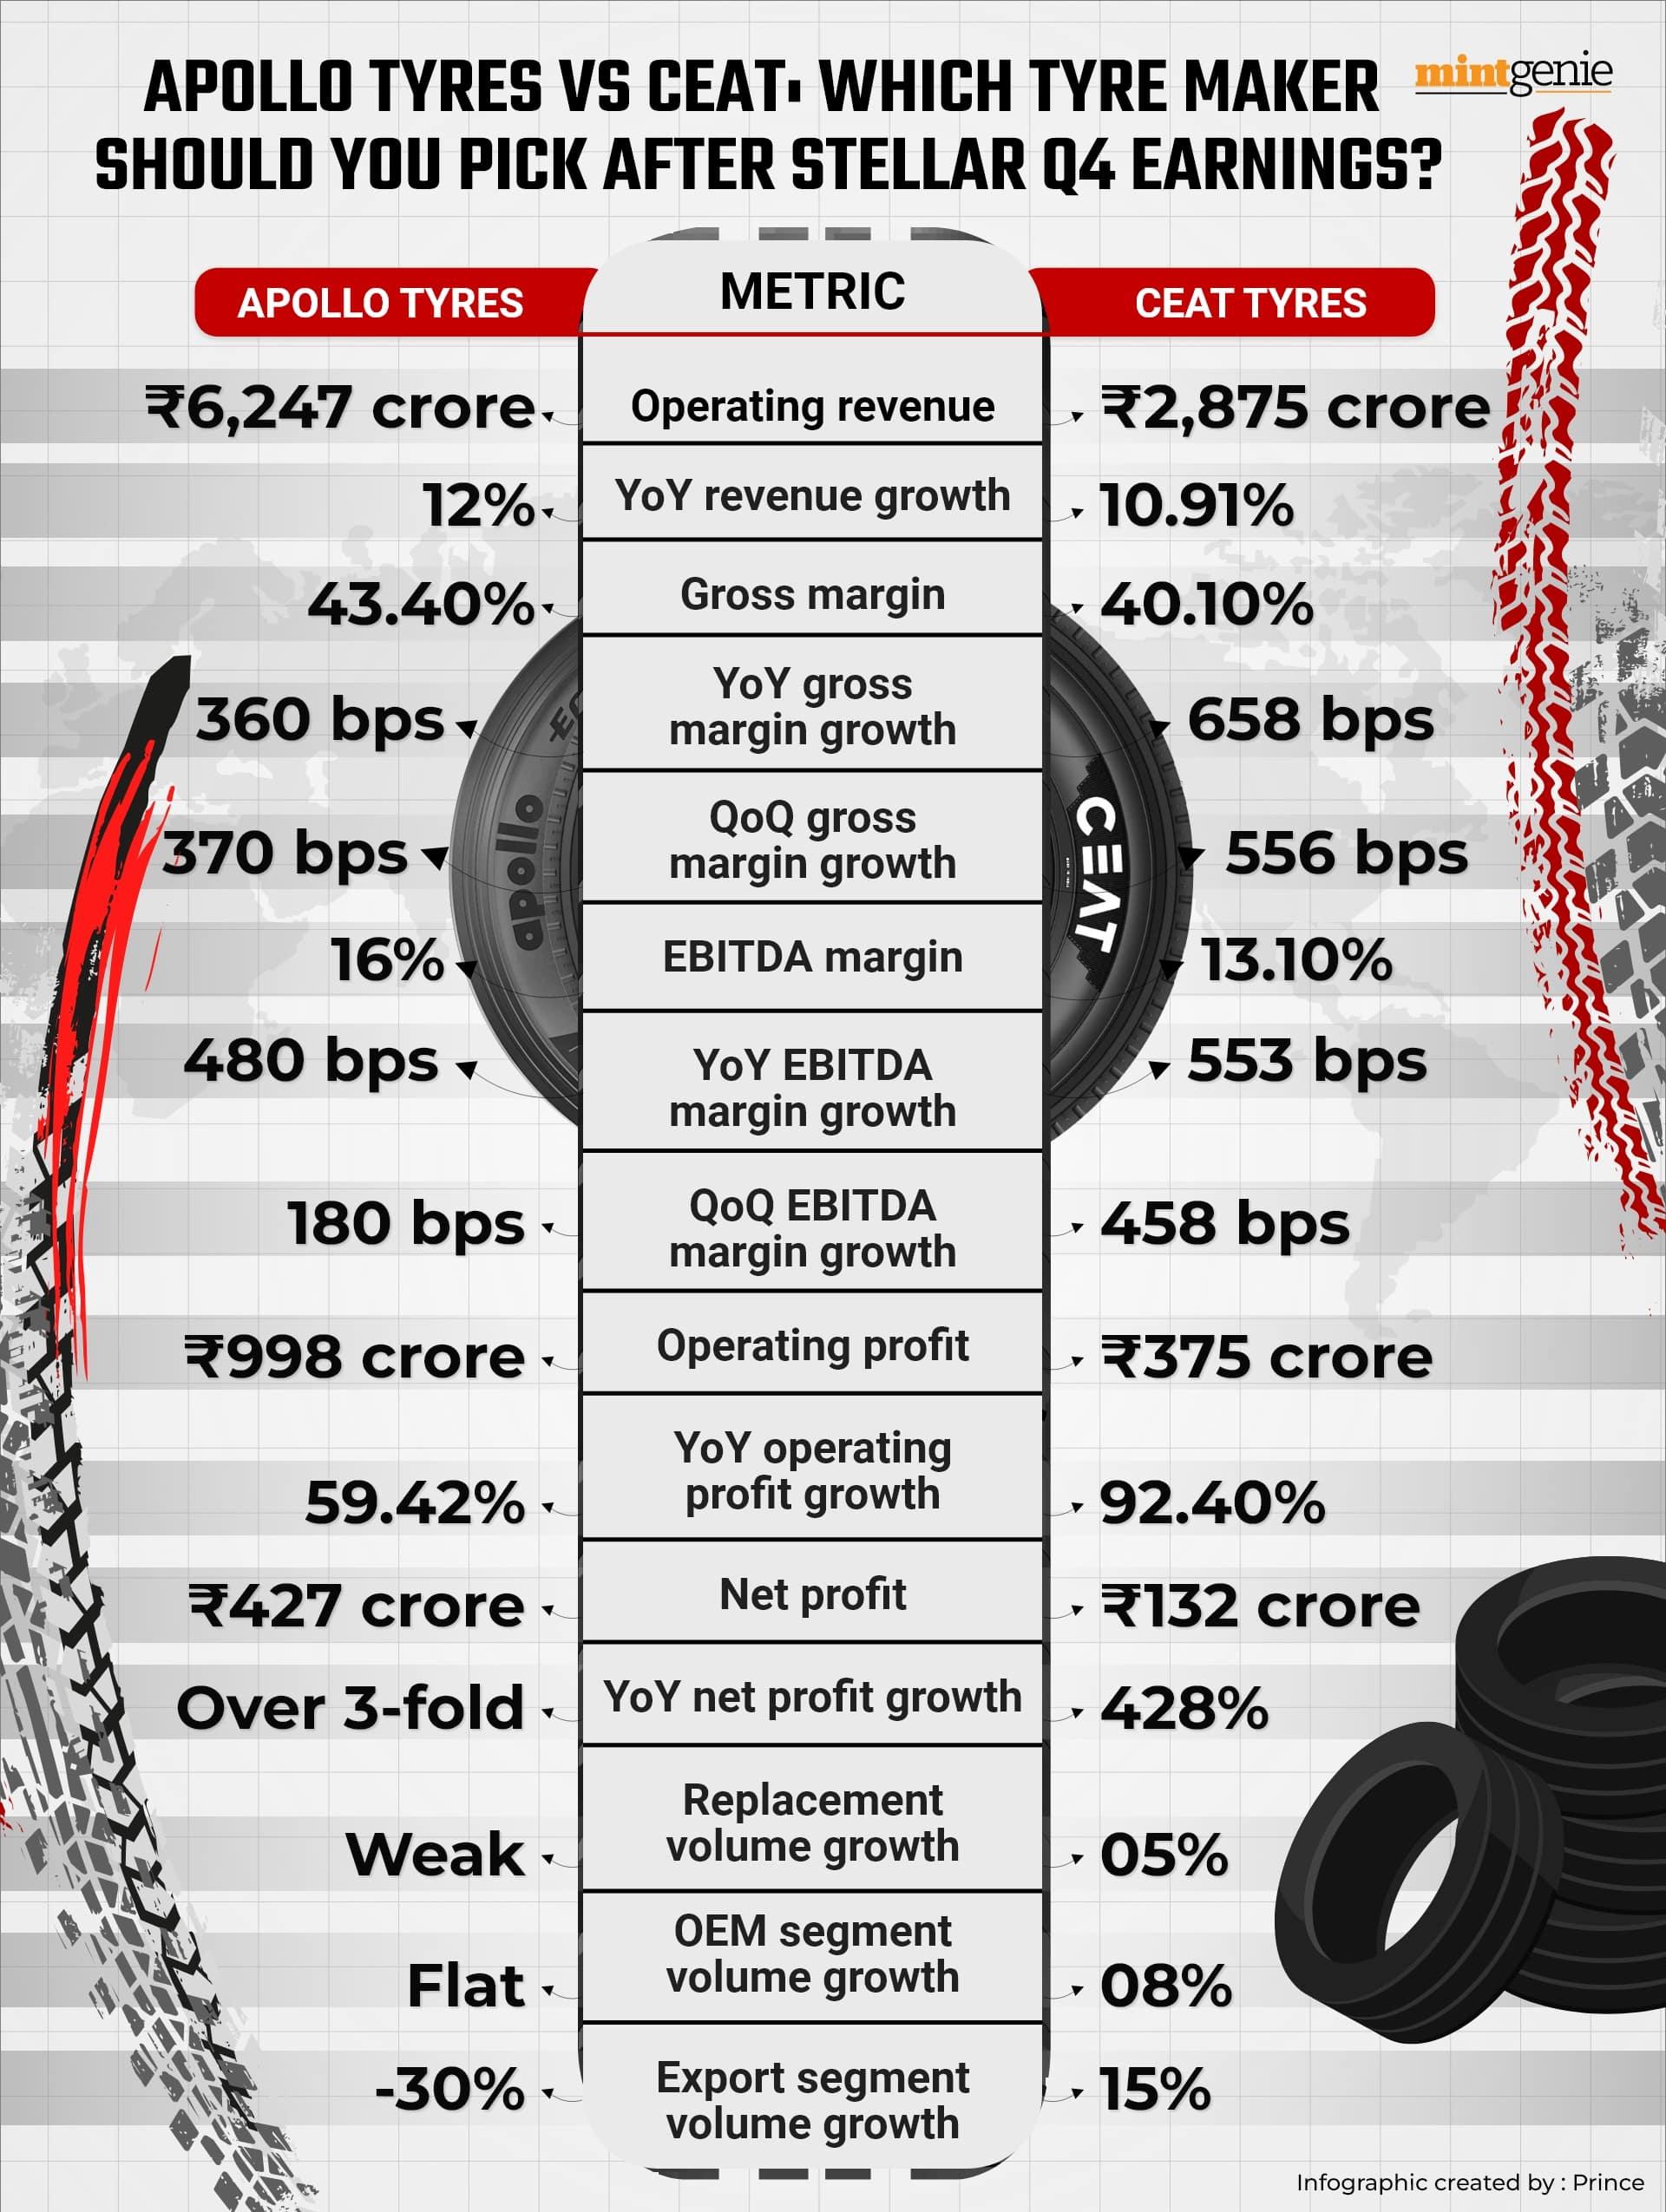 CEAT vs Apollo Tyres post Q4 earnings